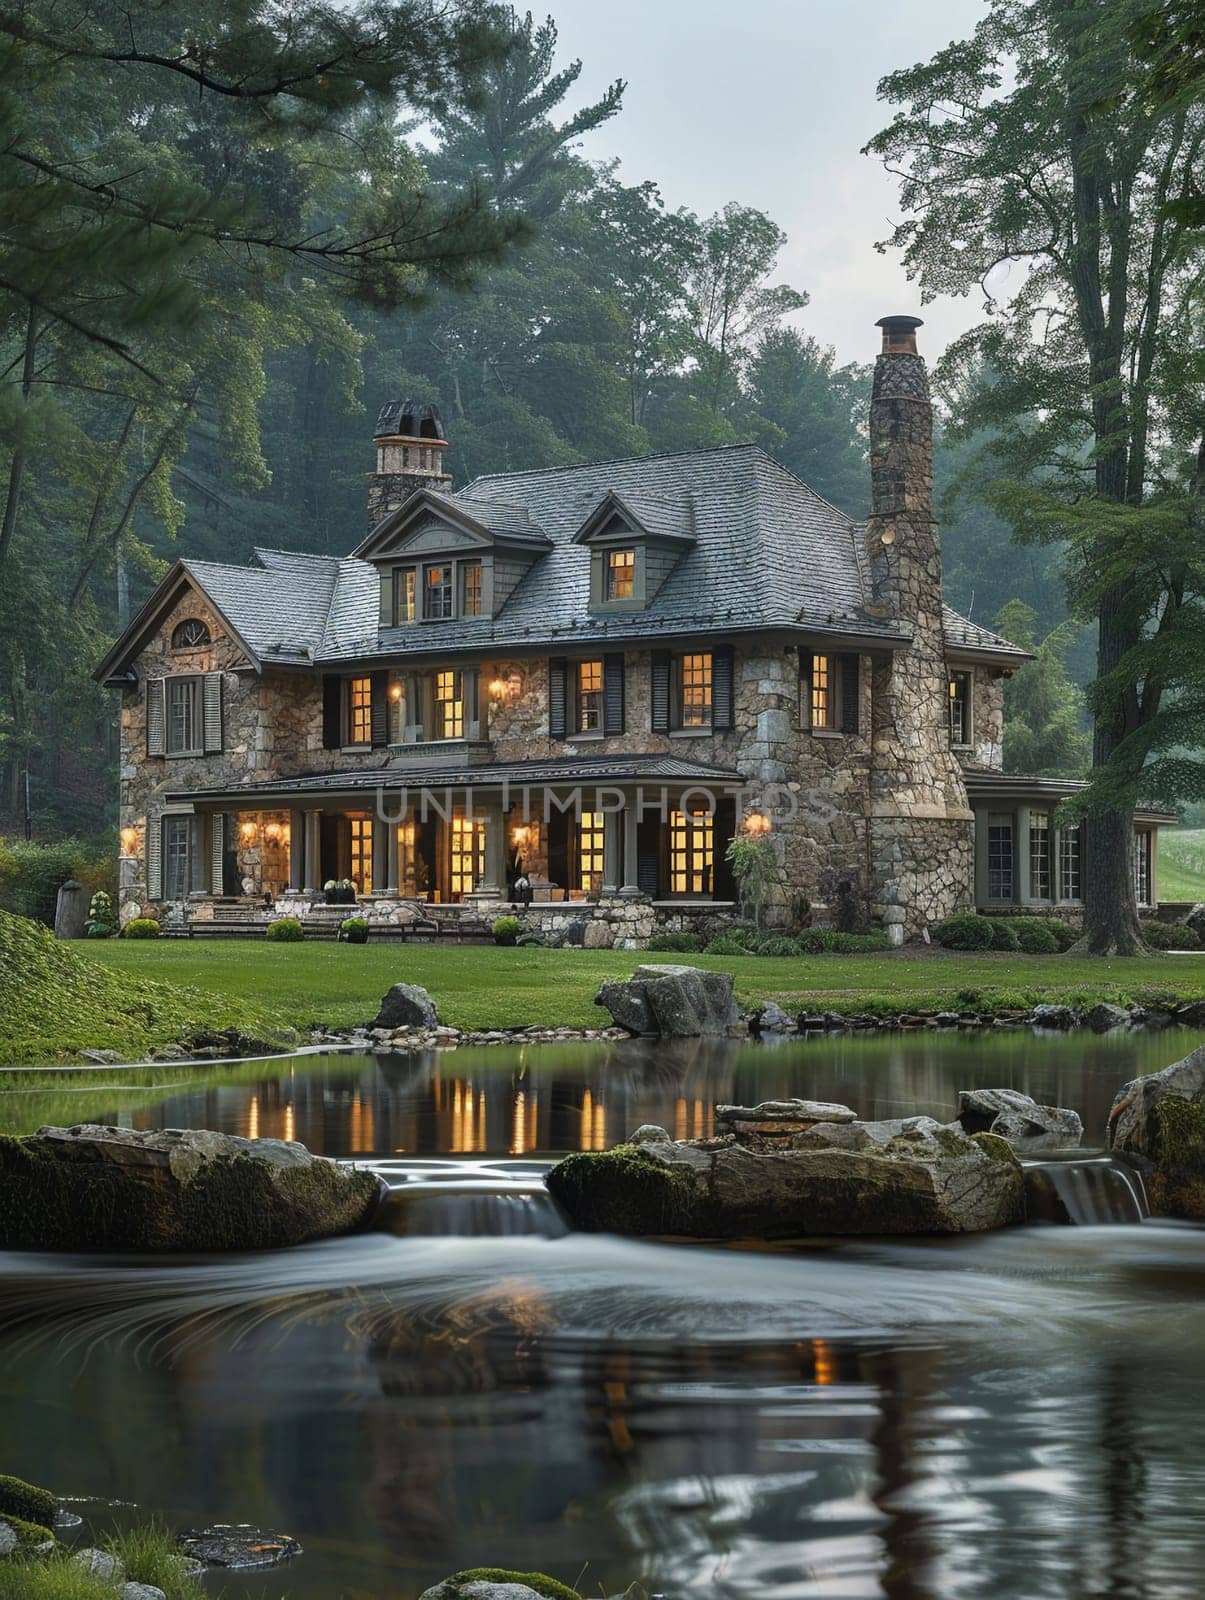 Traditional Stone English Countryside Estate, with rolling hills and private pond.